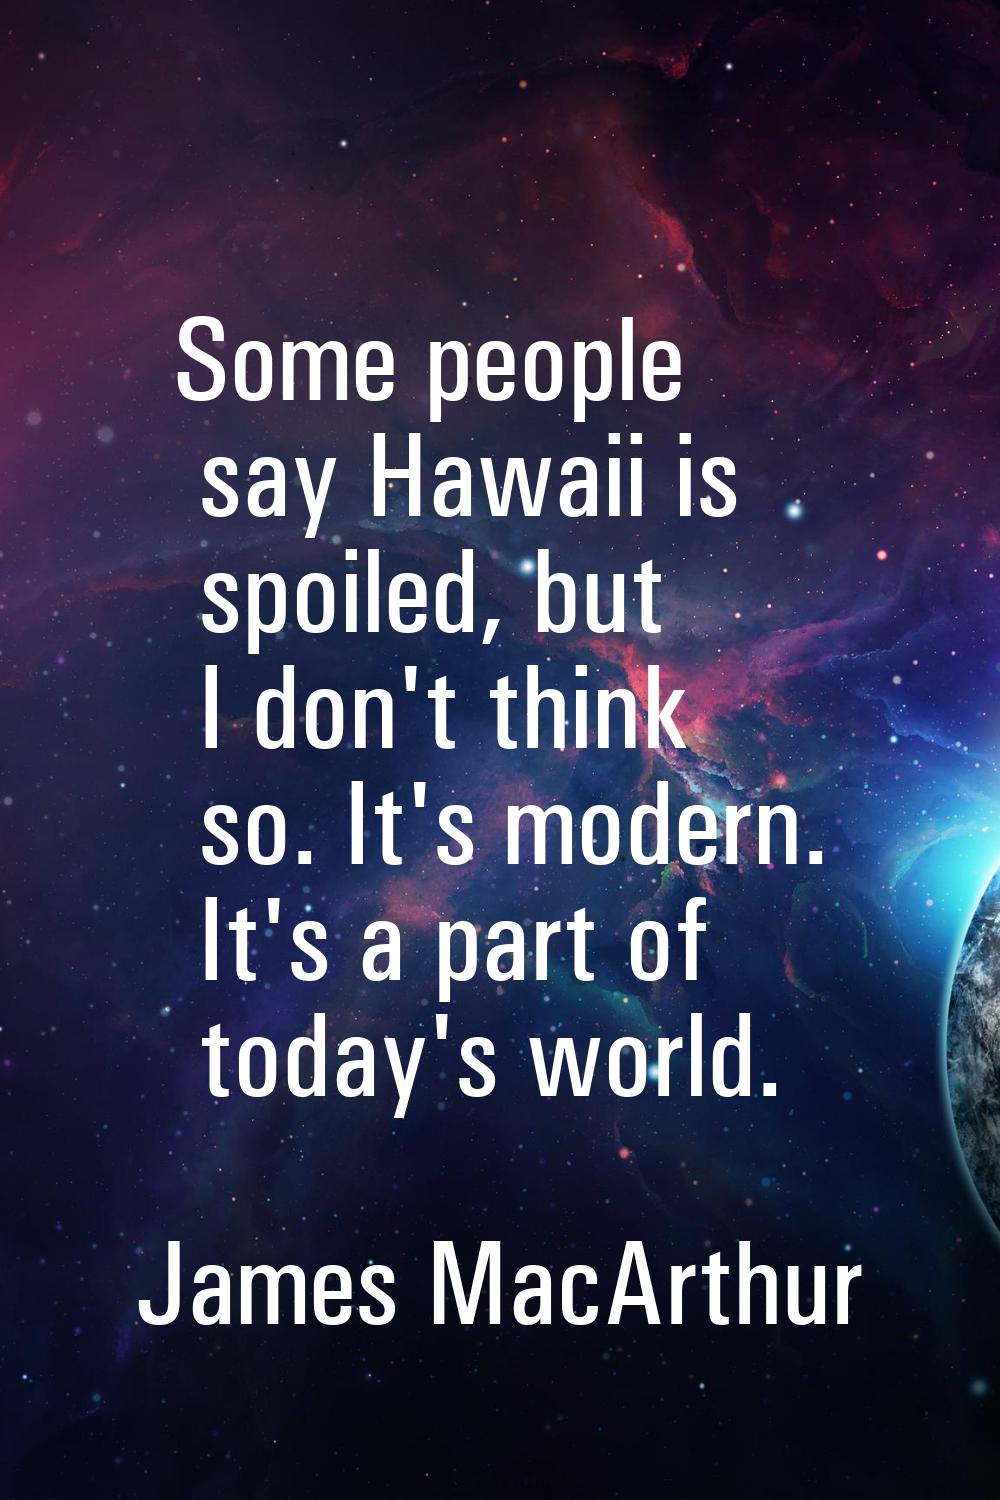 Some people say Hawaii is spoiled, but I don't think so. It's modern. It's a part of today's world.